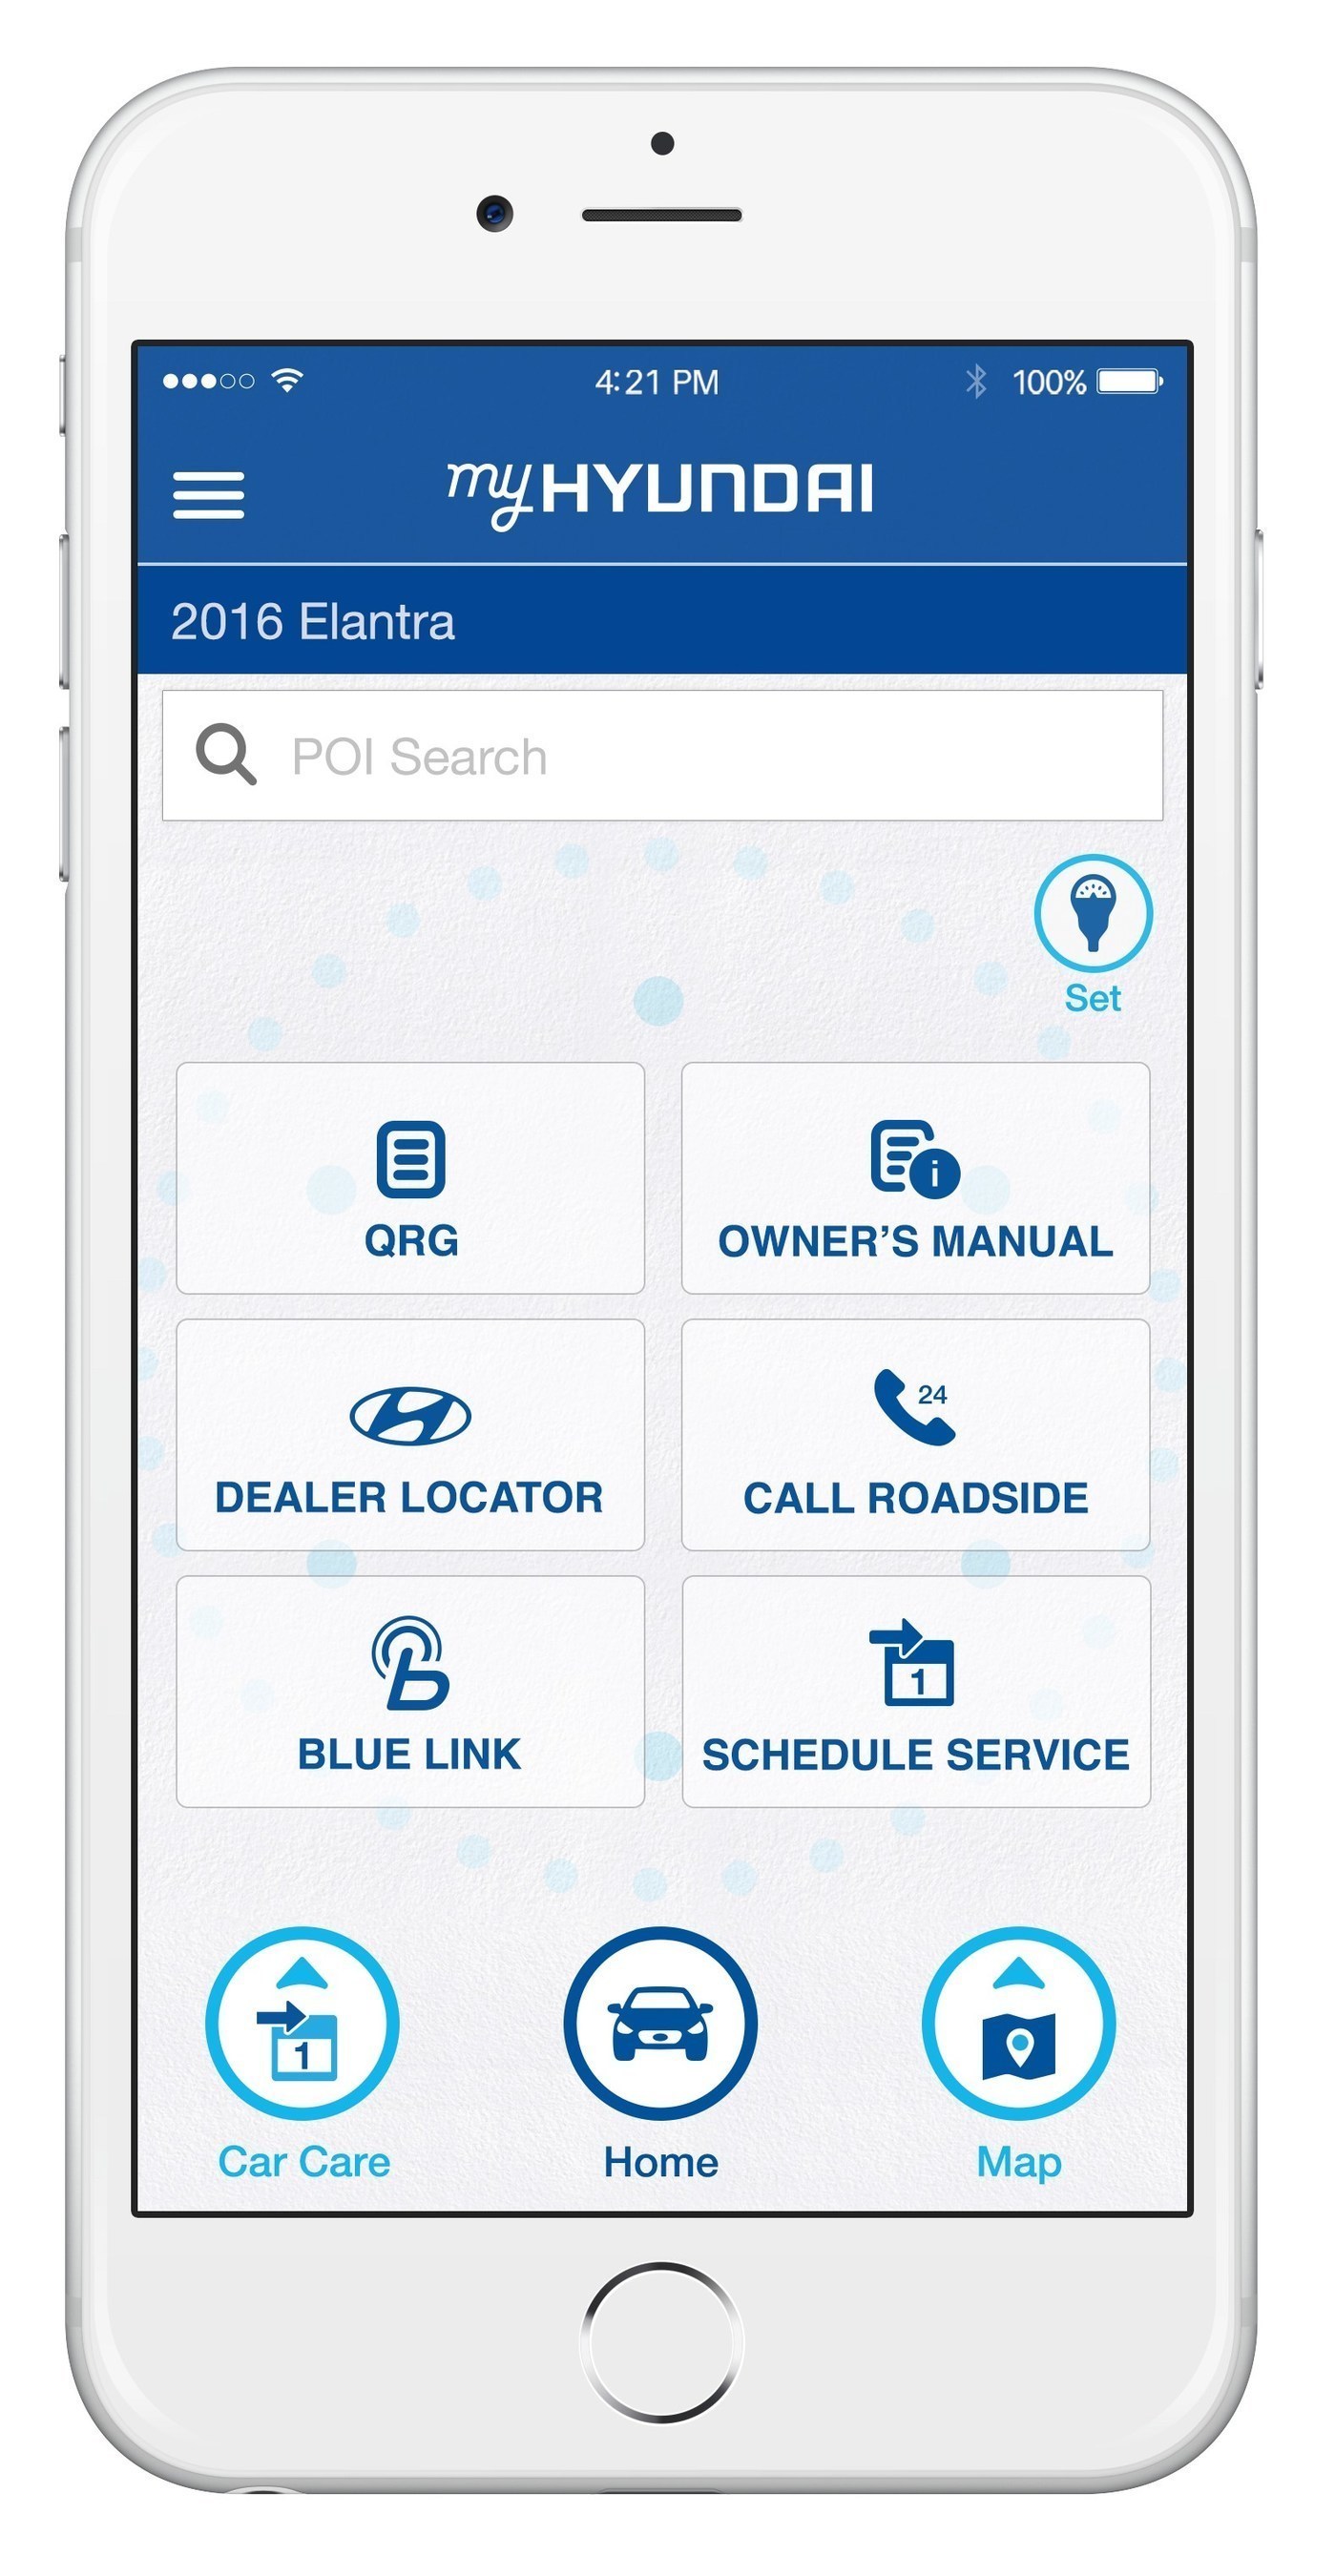 HYUNDAI LAUNCHES NEW ALL-IN-ONE OWNER'S APP TO ENHANCE CUSTOMER EXPERIENCE - Hyundai is debuting a new mobile app for owners called MyHyundai with Blue Link. The new app integrates services currently available in the previously separate Blue Link and Car Care mobile apps.